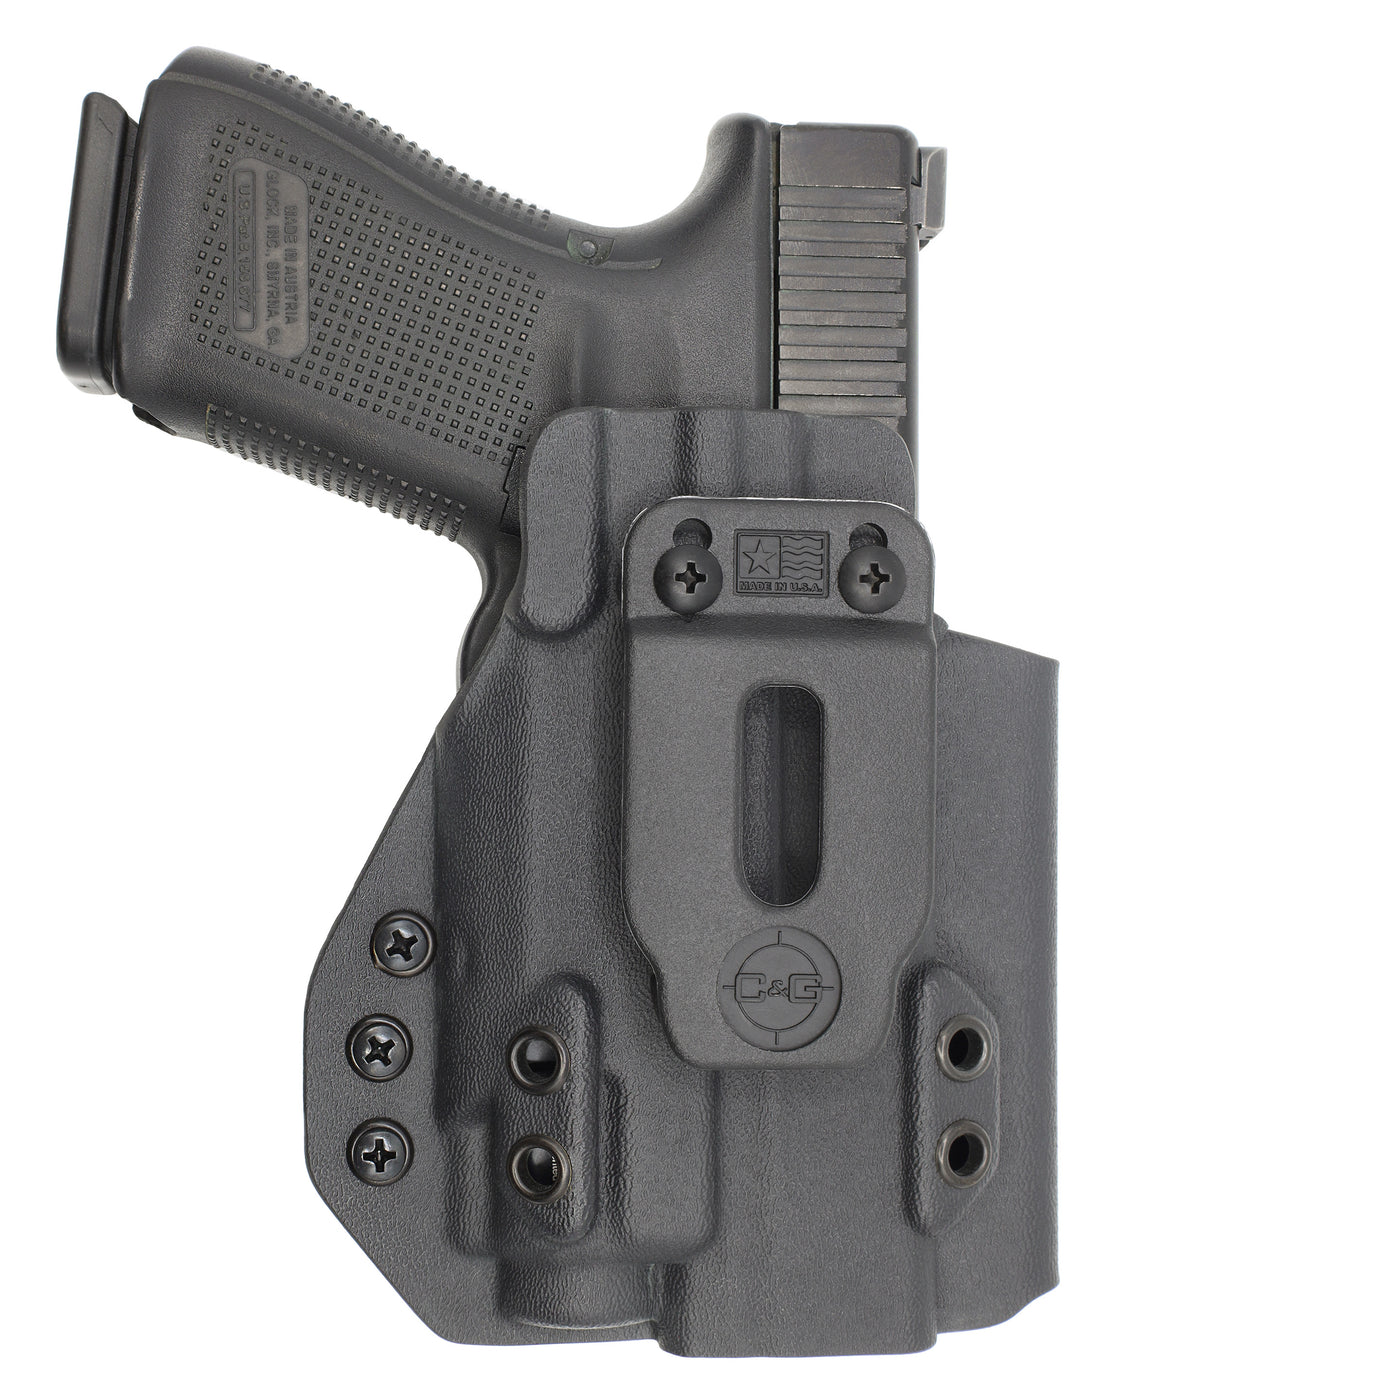 C&G Holsters quickship IWB Tactical CZ P10/c streamlight TLR8 holstered